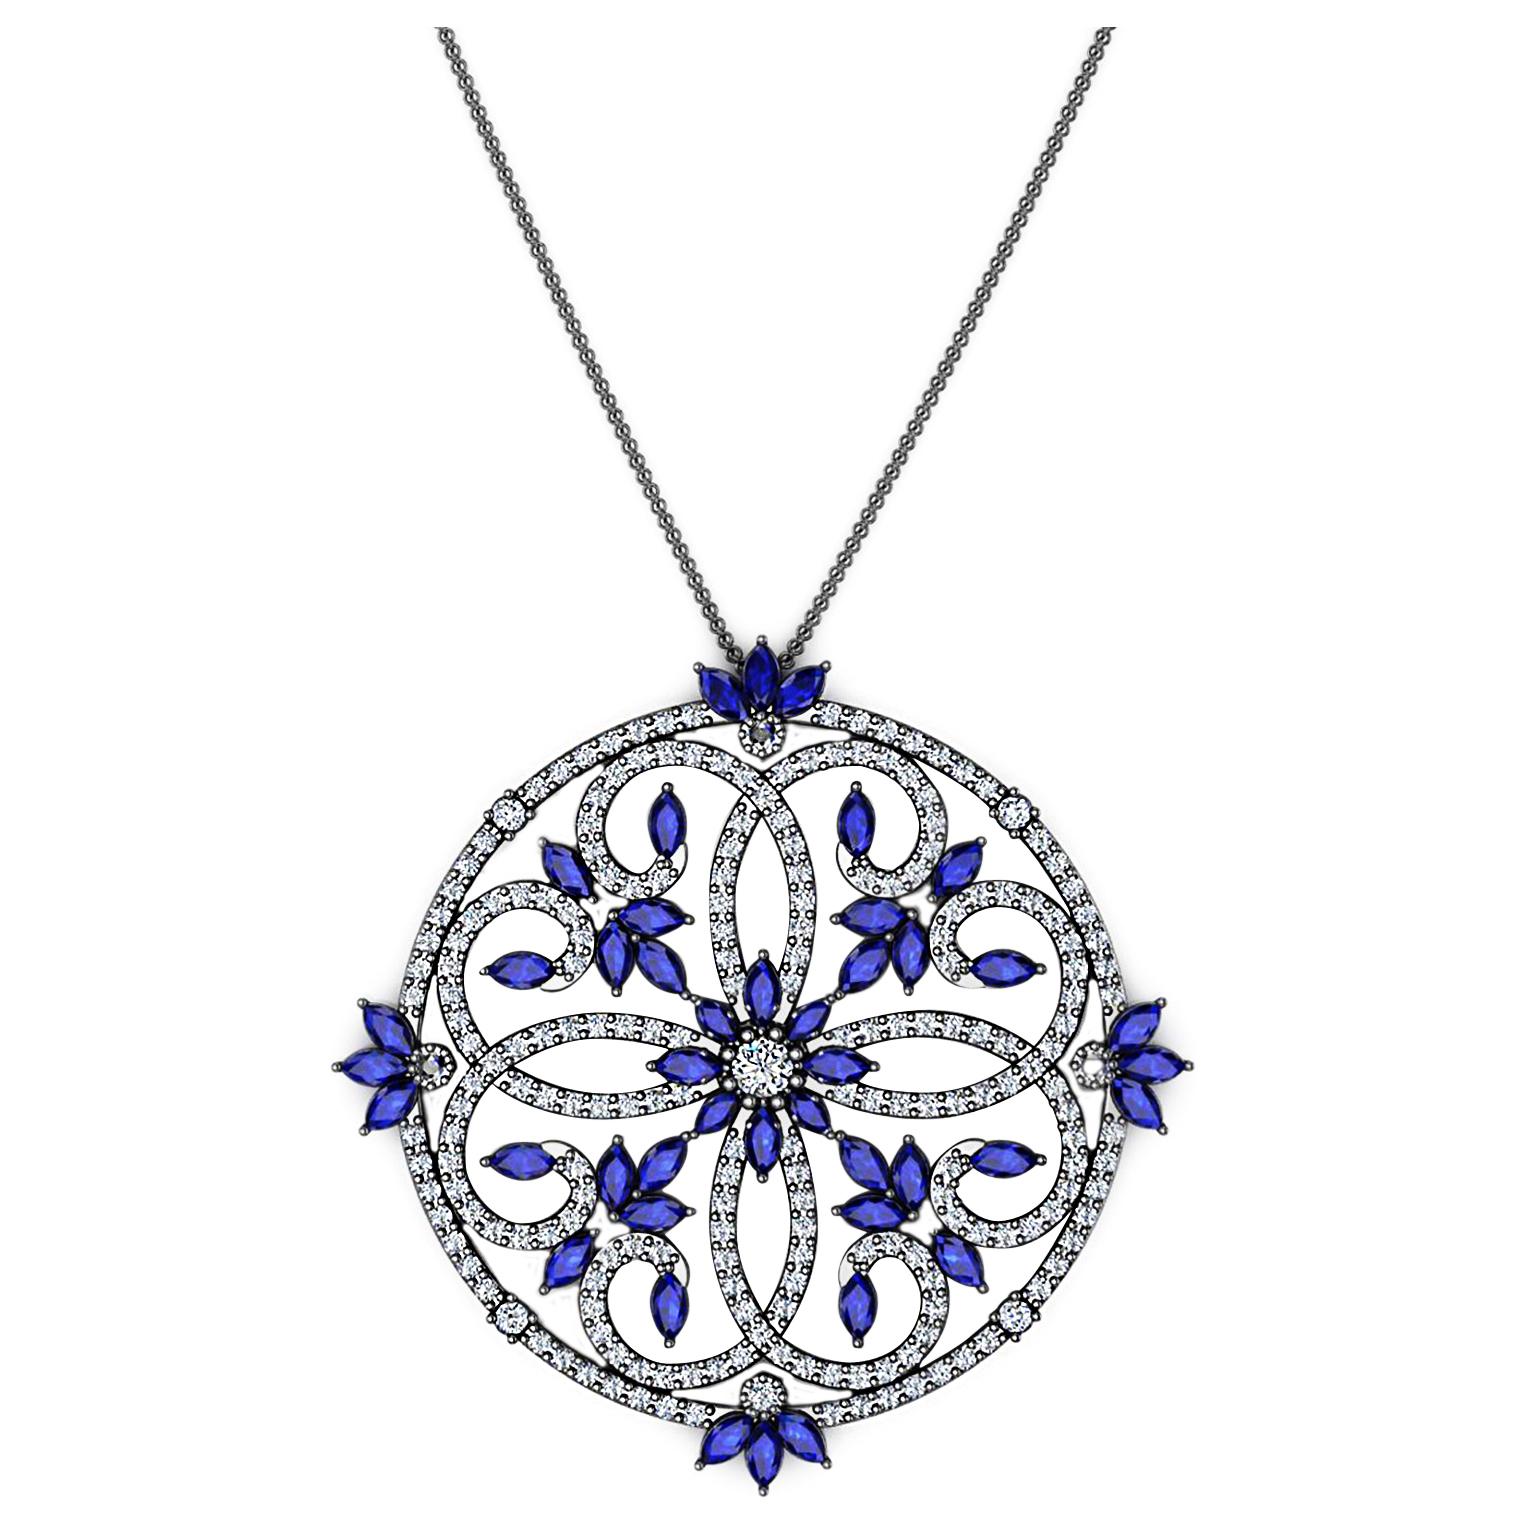 4.95 Carats Blue Sapphires and Diamonds Necklace in 18 Karat black Gold